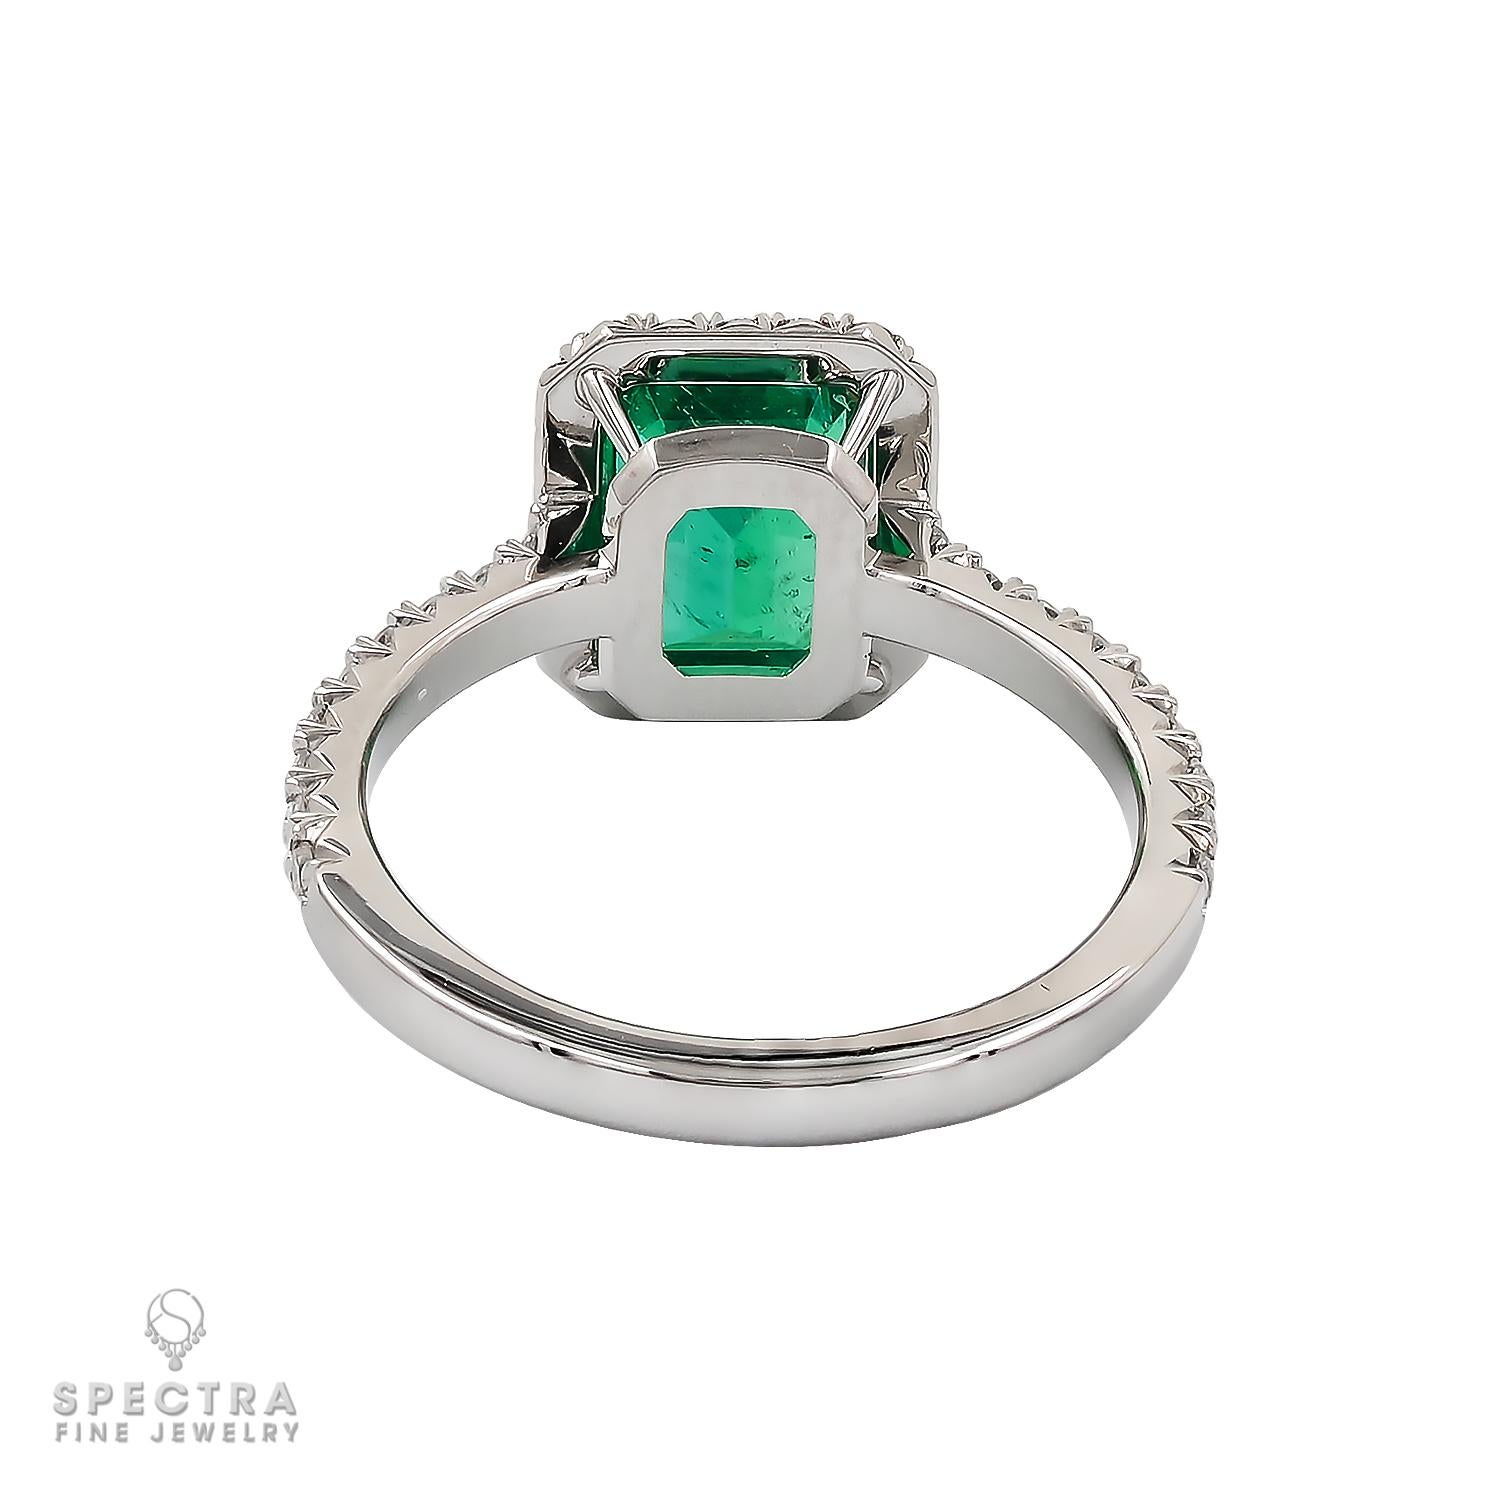 Contemporary Spectra Fine Jewelry GRS Certified 1.47 Carat Colombian Emerald Diamond Ring For Sale